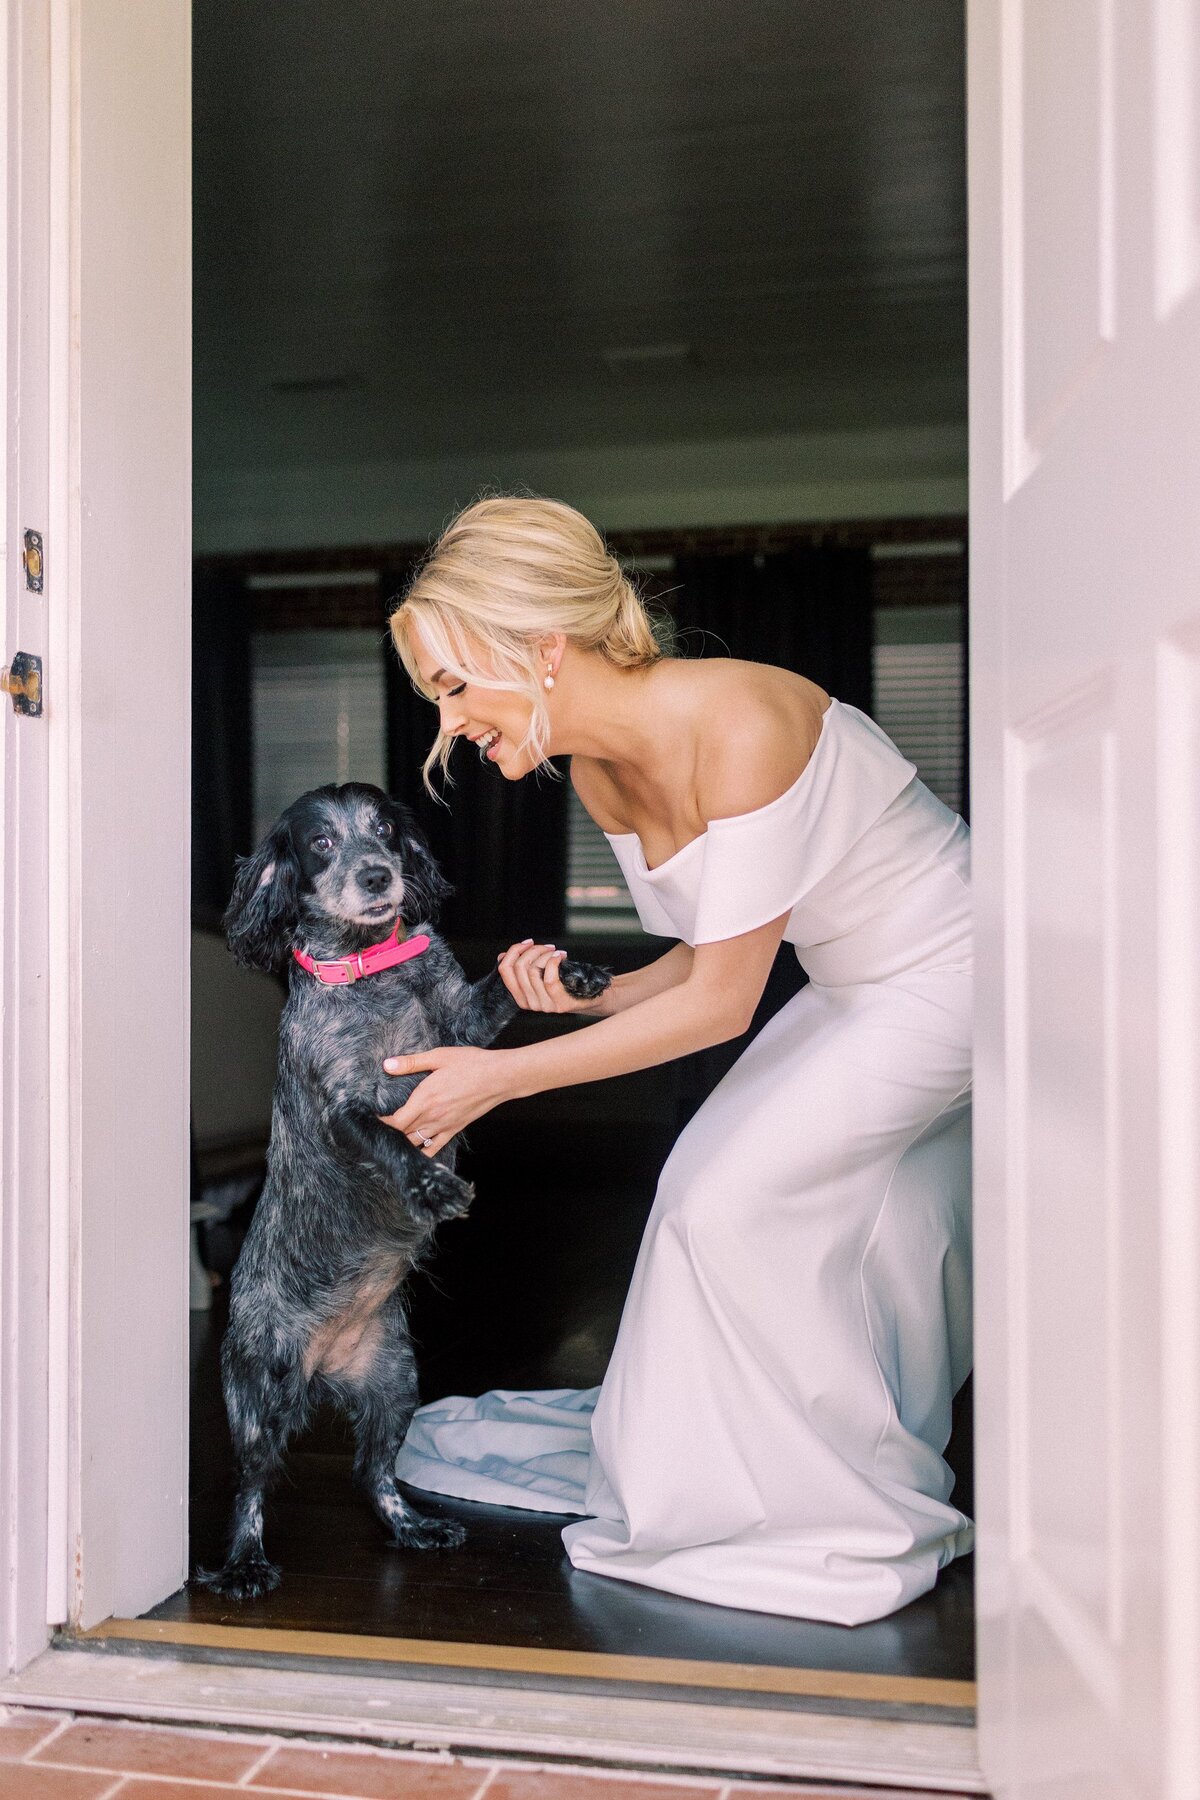 Bride in wedding gown plays with her dog